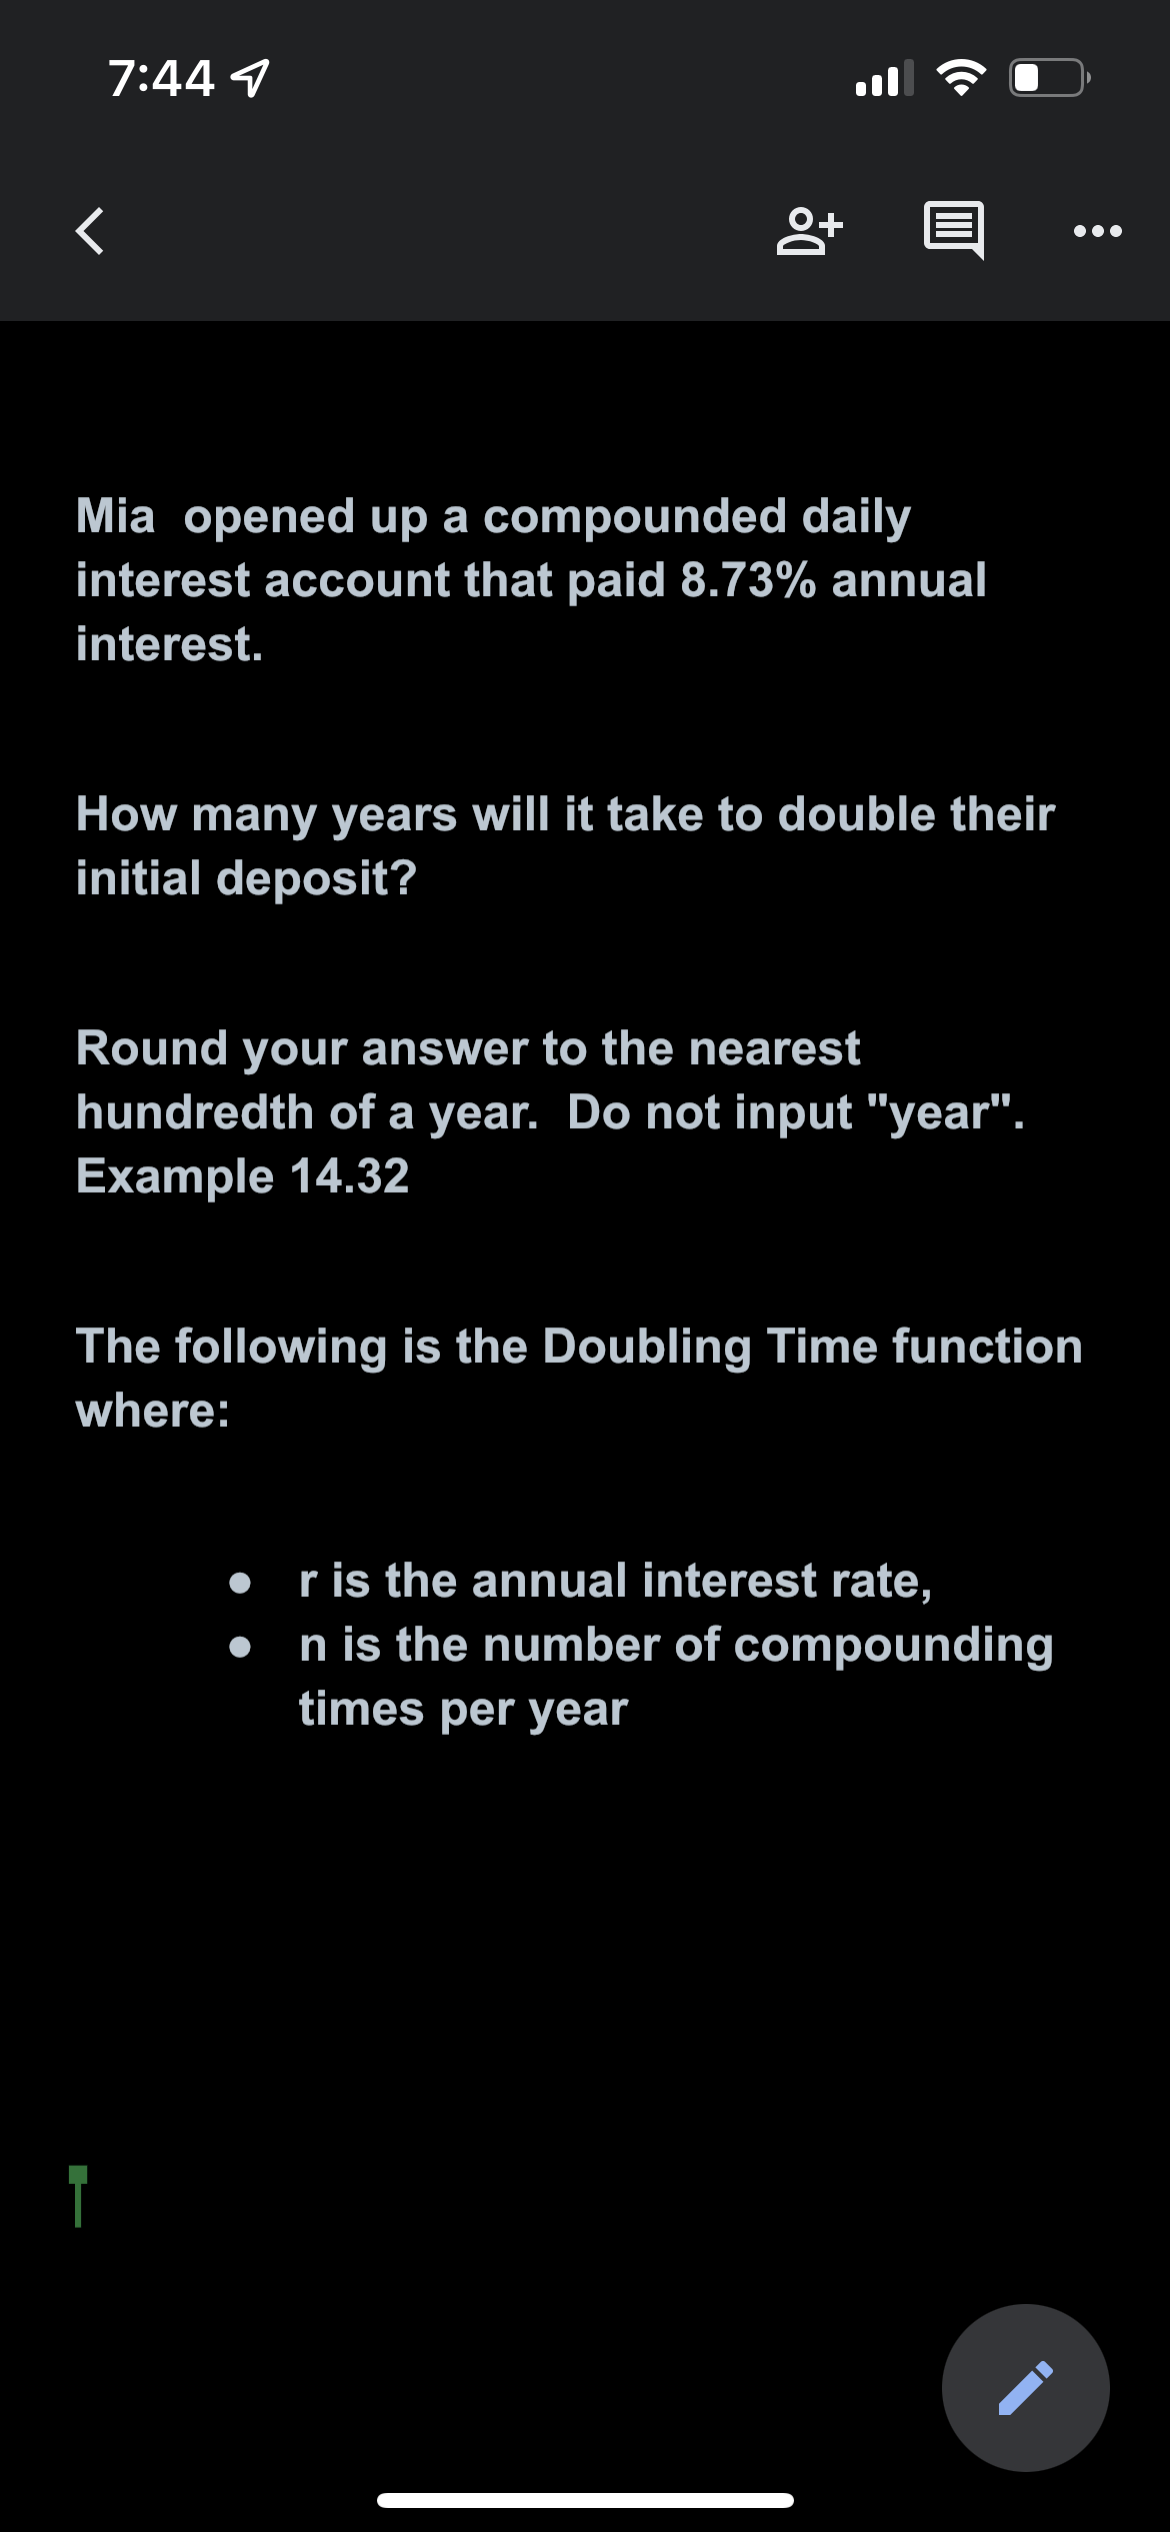 7:44 1
<
8+
Mia opened up a compounded daily
interest account that paid 8.73% annual
interest.
How many years will it take to double their
initial deposit?
Round your answer to the nearest
hundredth of a year. Do not input "year".
Example 14.32
The following is the Doubling Time function
where:
r is the annual interest rate,
n is the number of compounding
times per year